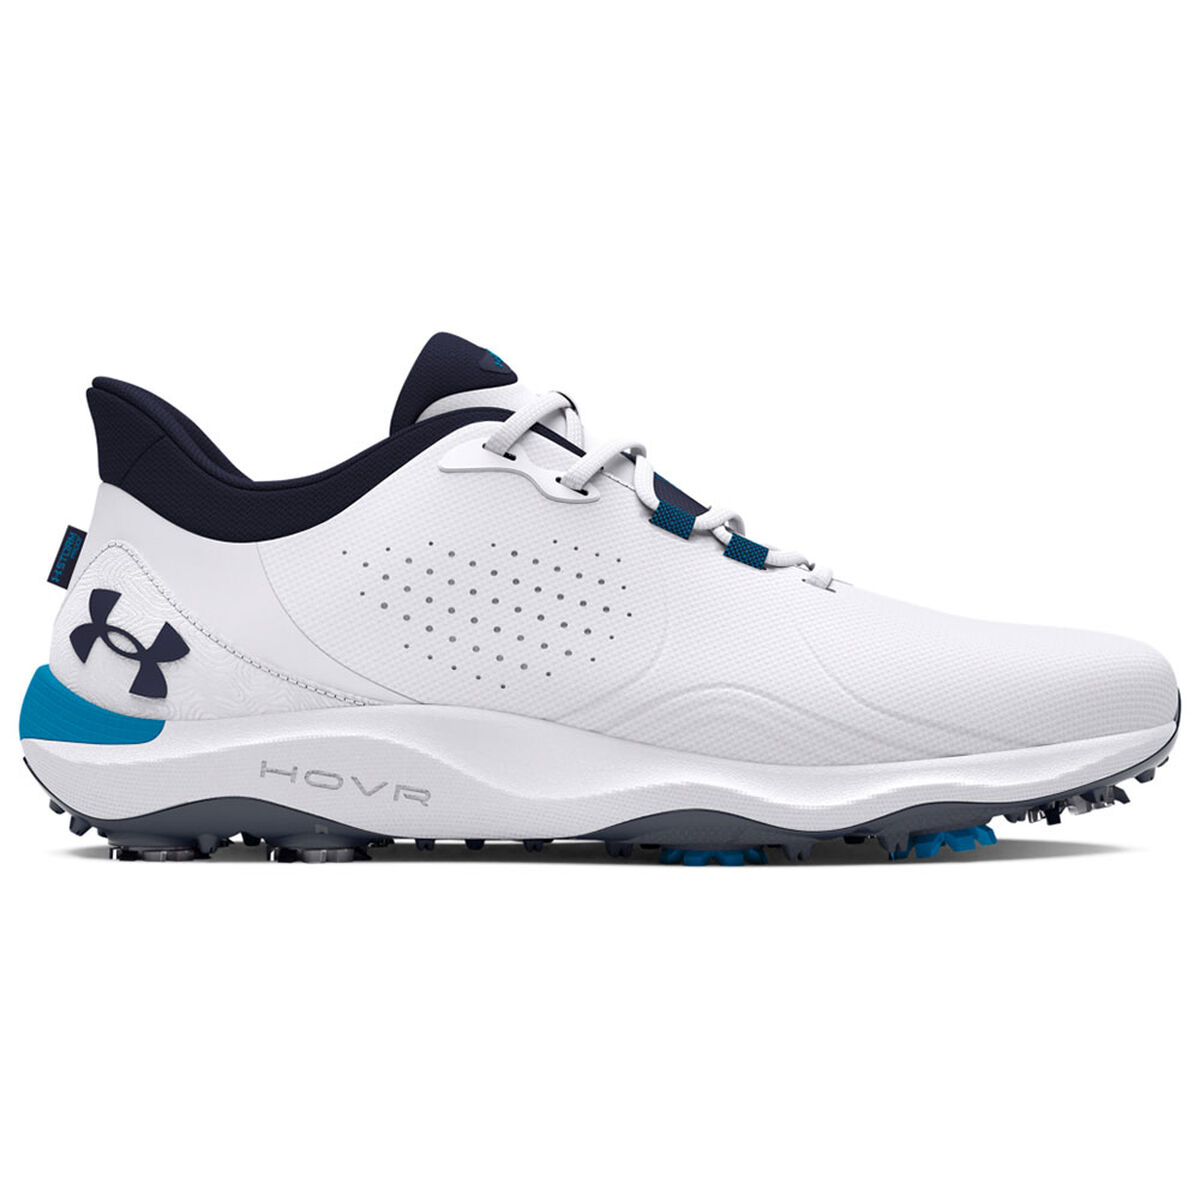 Under Armour Men’s Drive Pro Waterproof Spiked Golf Shoes, Mens, White/capri/midnight navy, 7 | American Golf